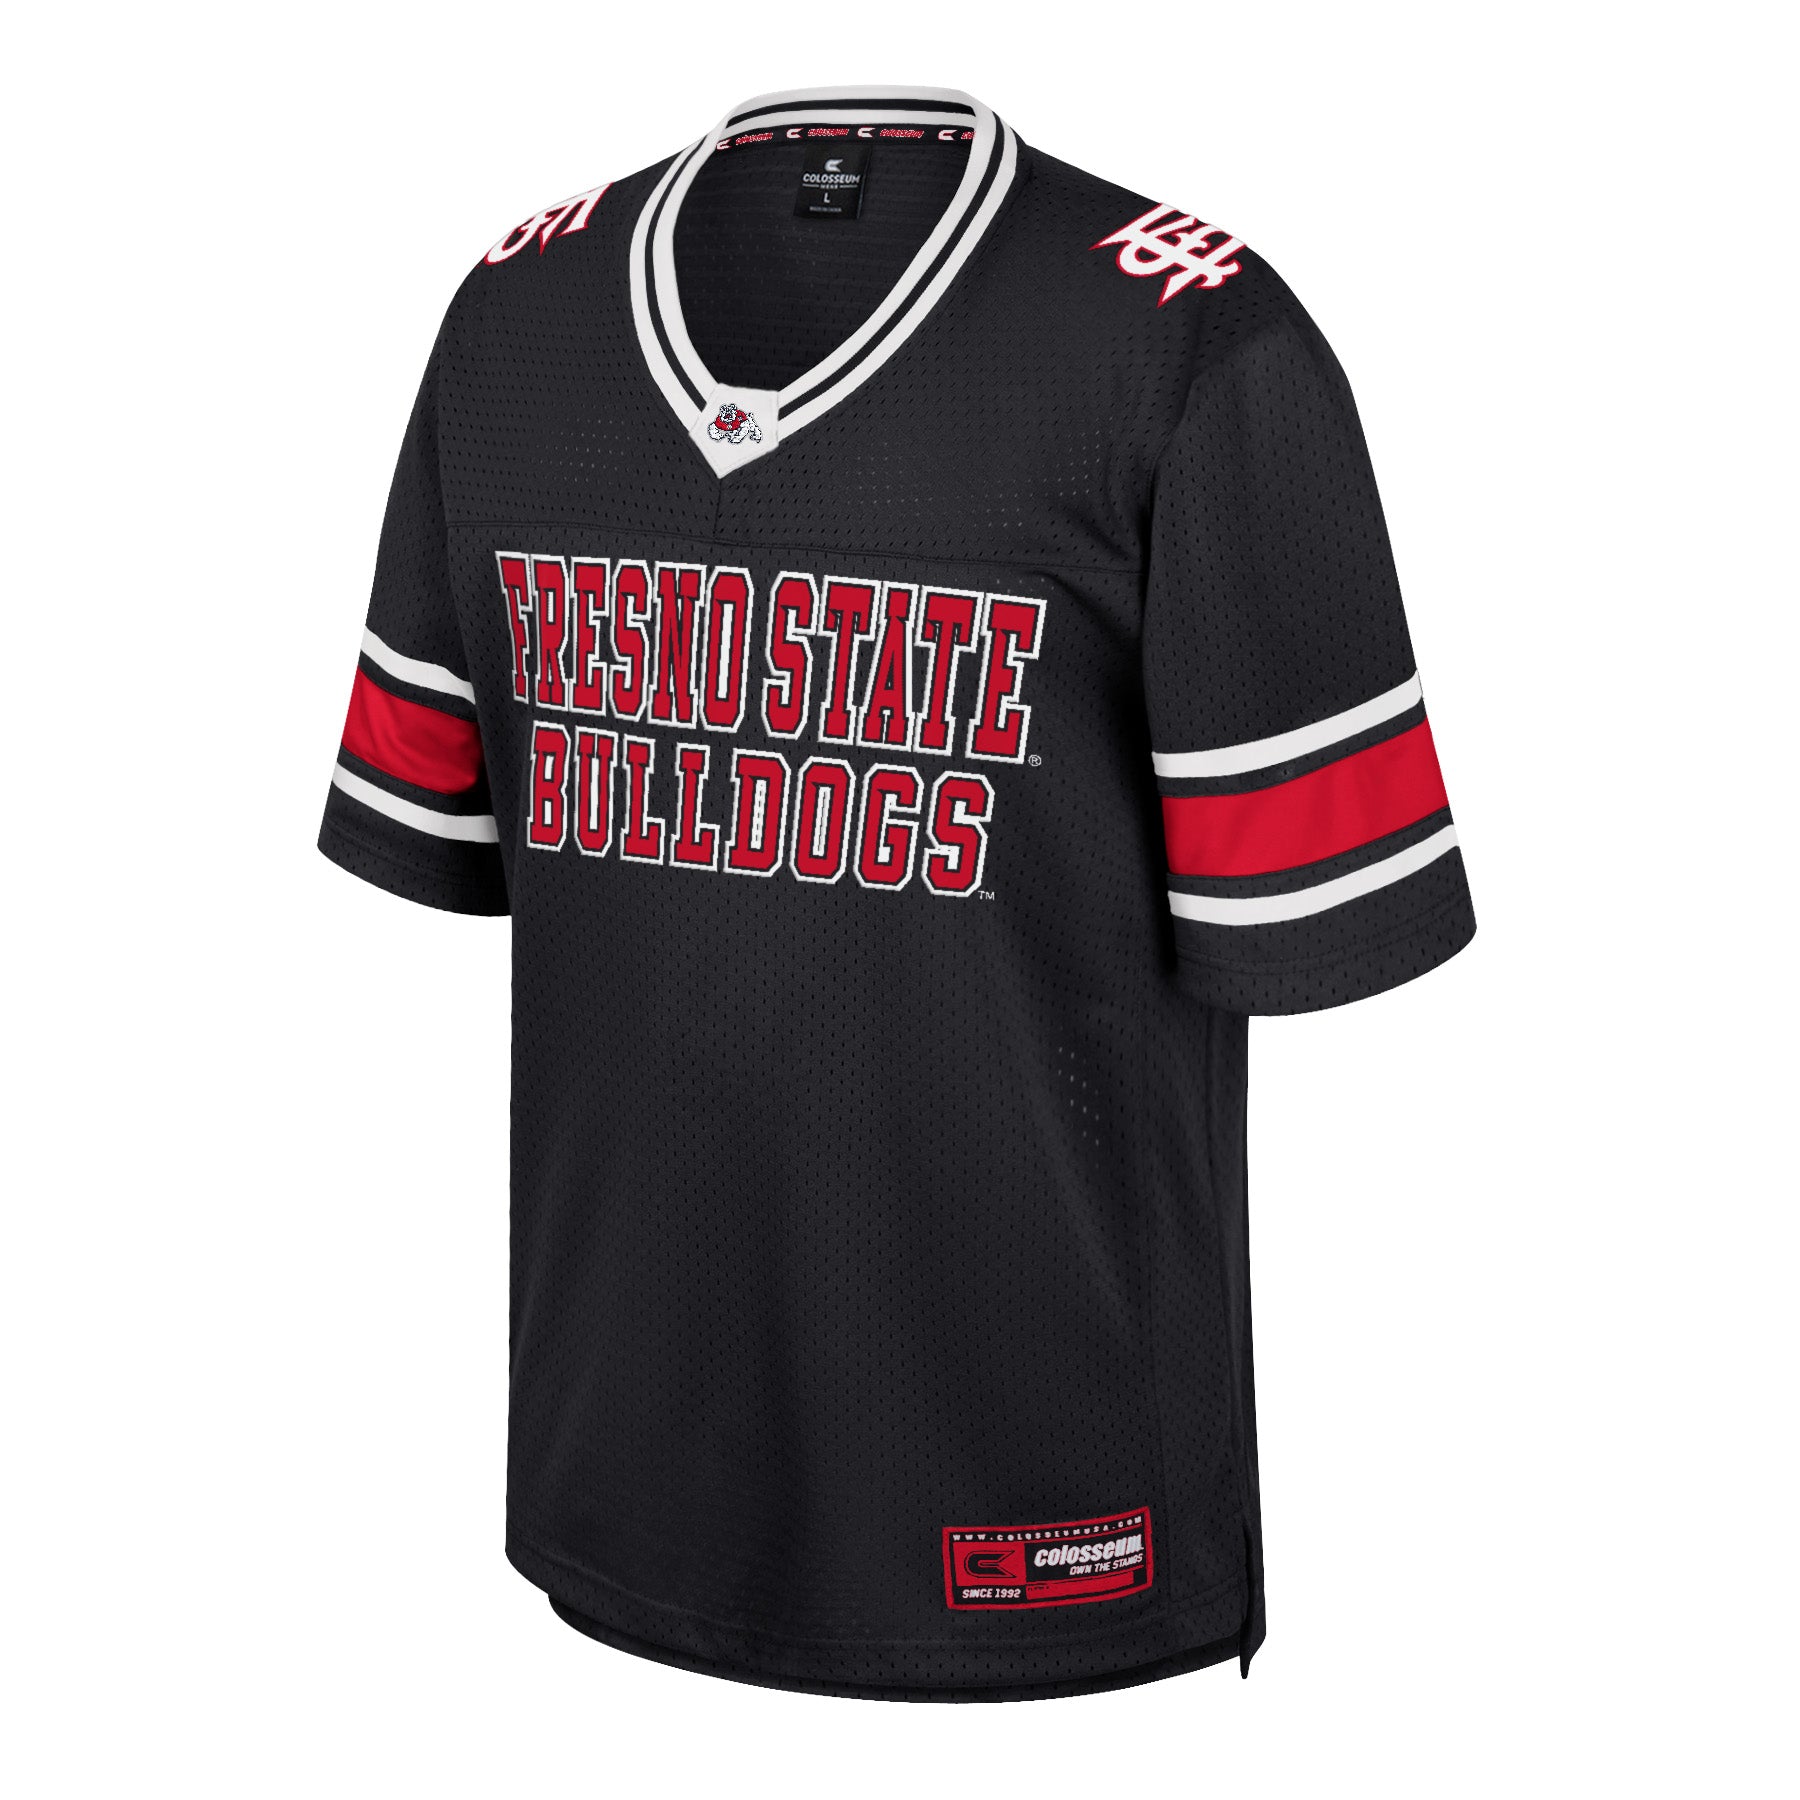 FRESNO STATE BULLDOGS YOUTH NO FATE FOOTBALL JERSEY - 23 BLACK